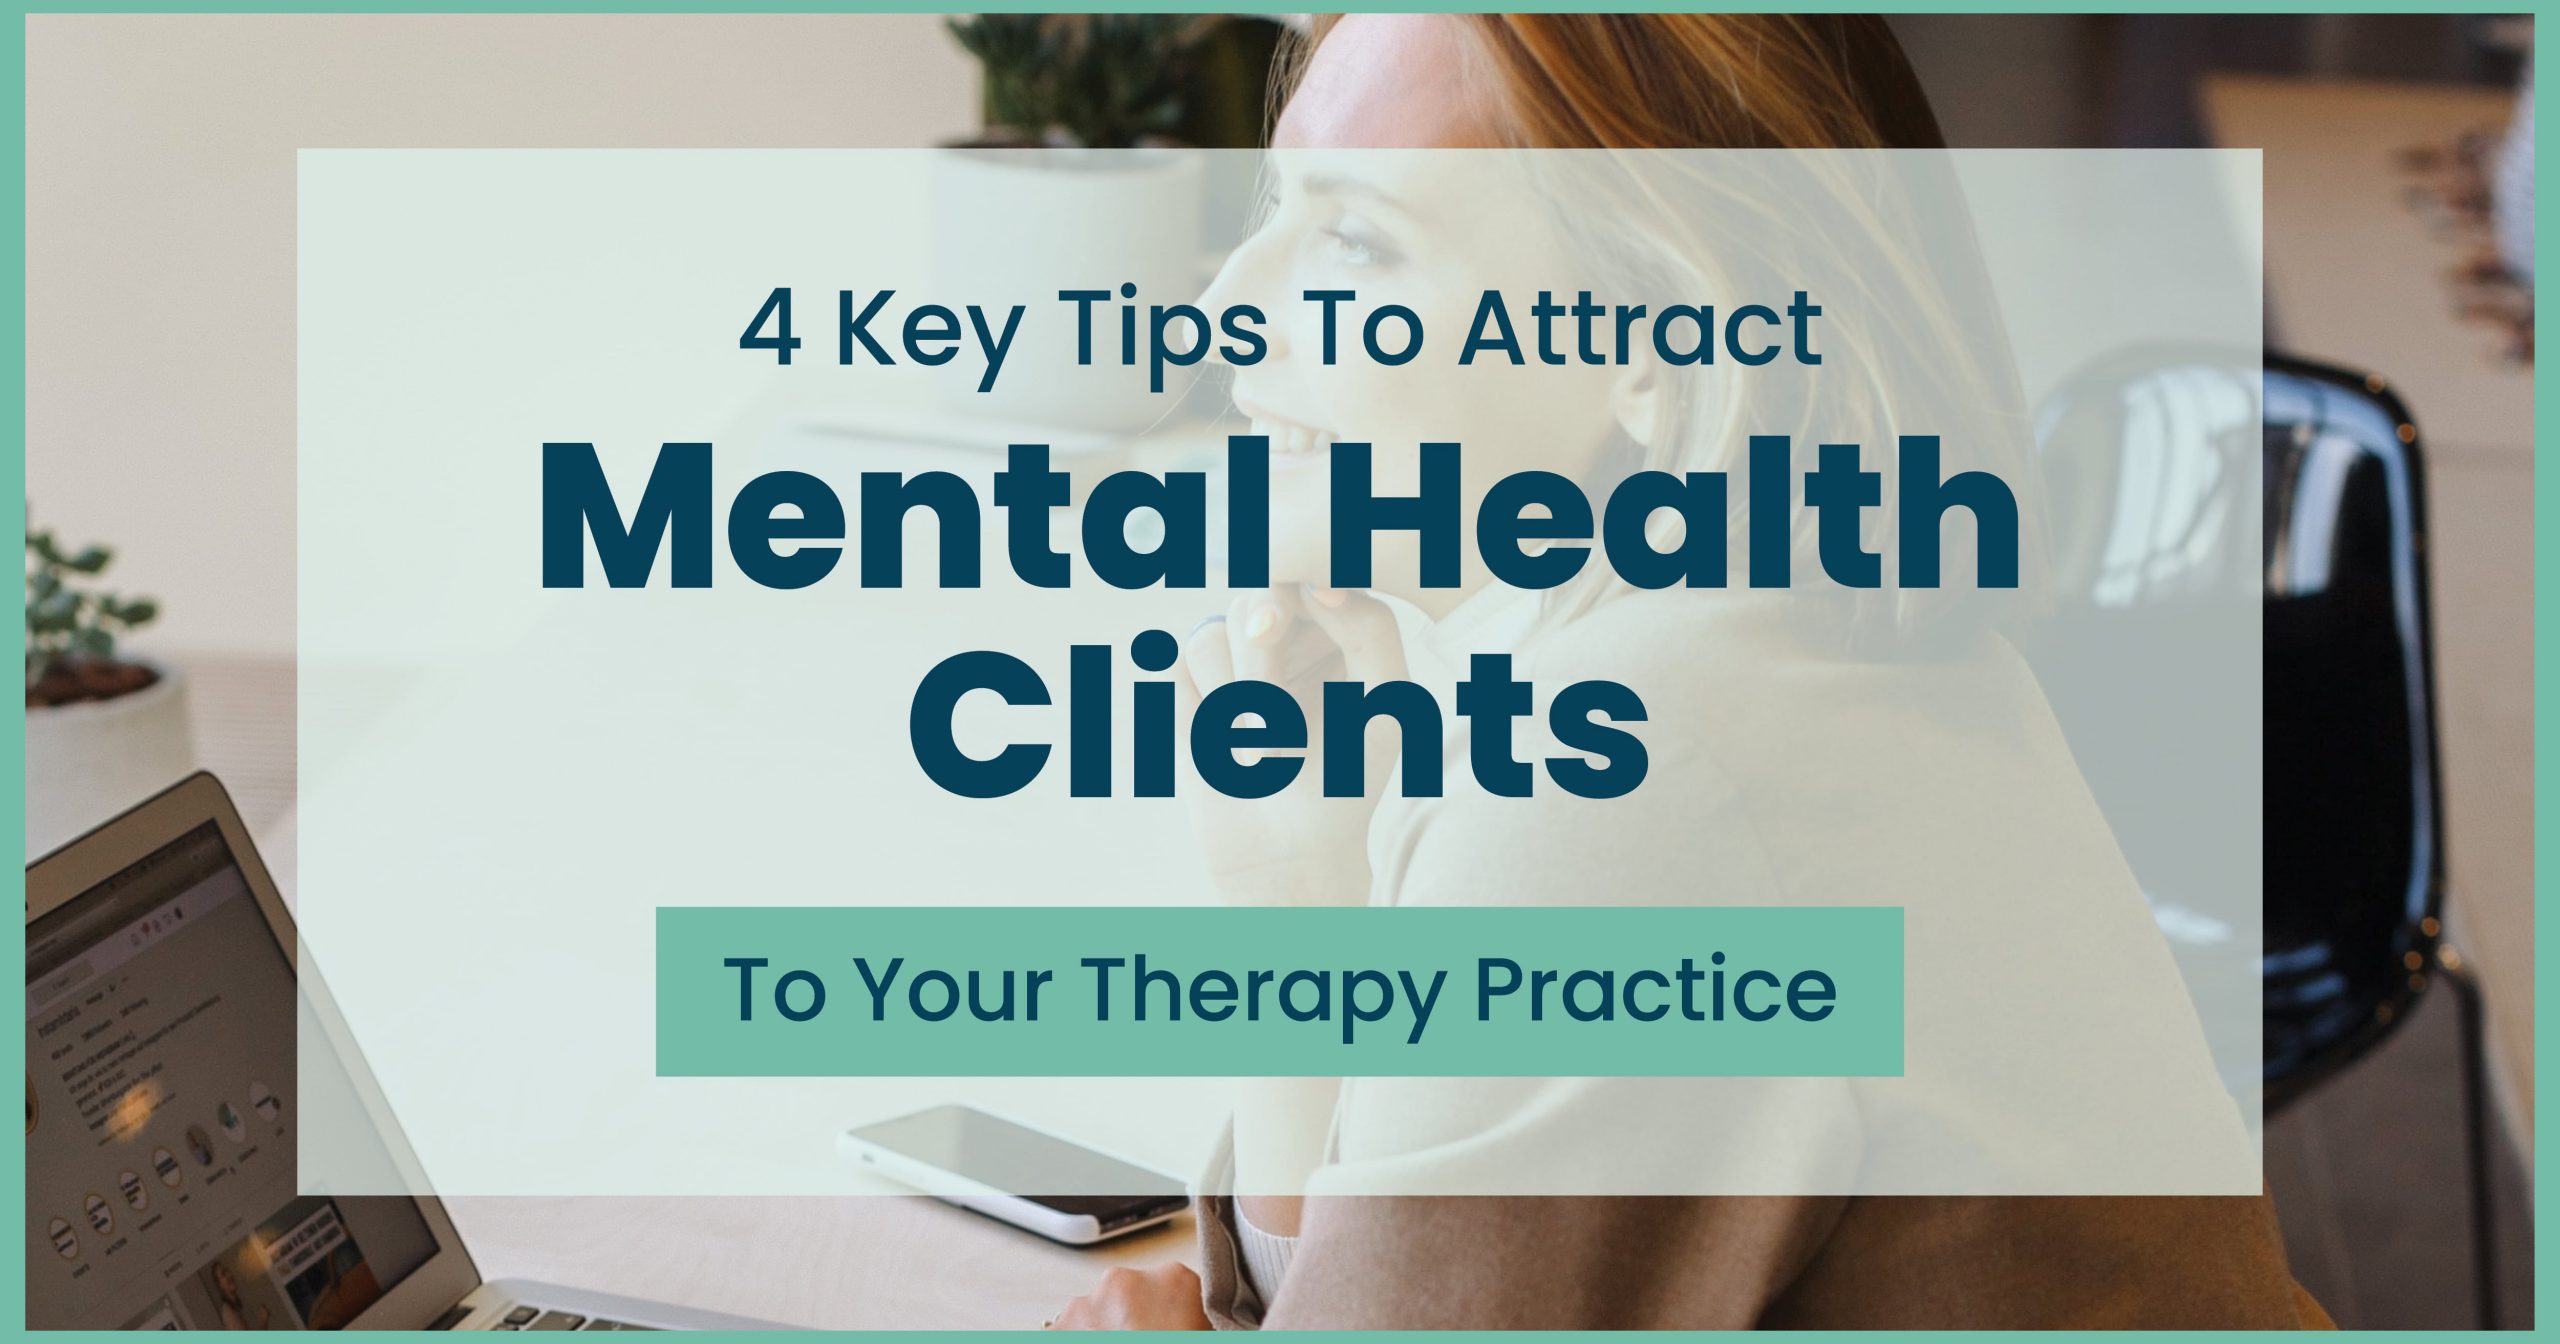 4-key-tips-to-attract-mental-health-clients-to-your-therapy-practice